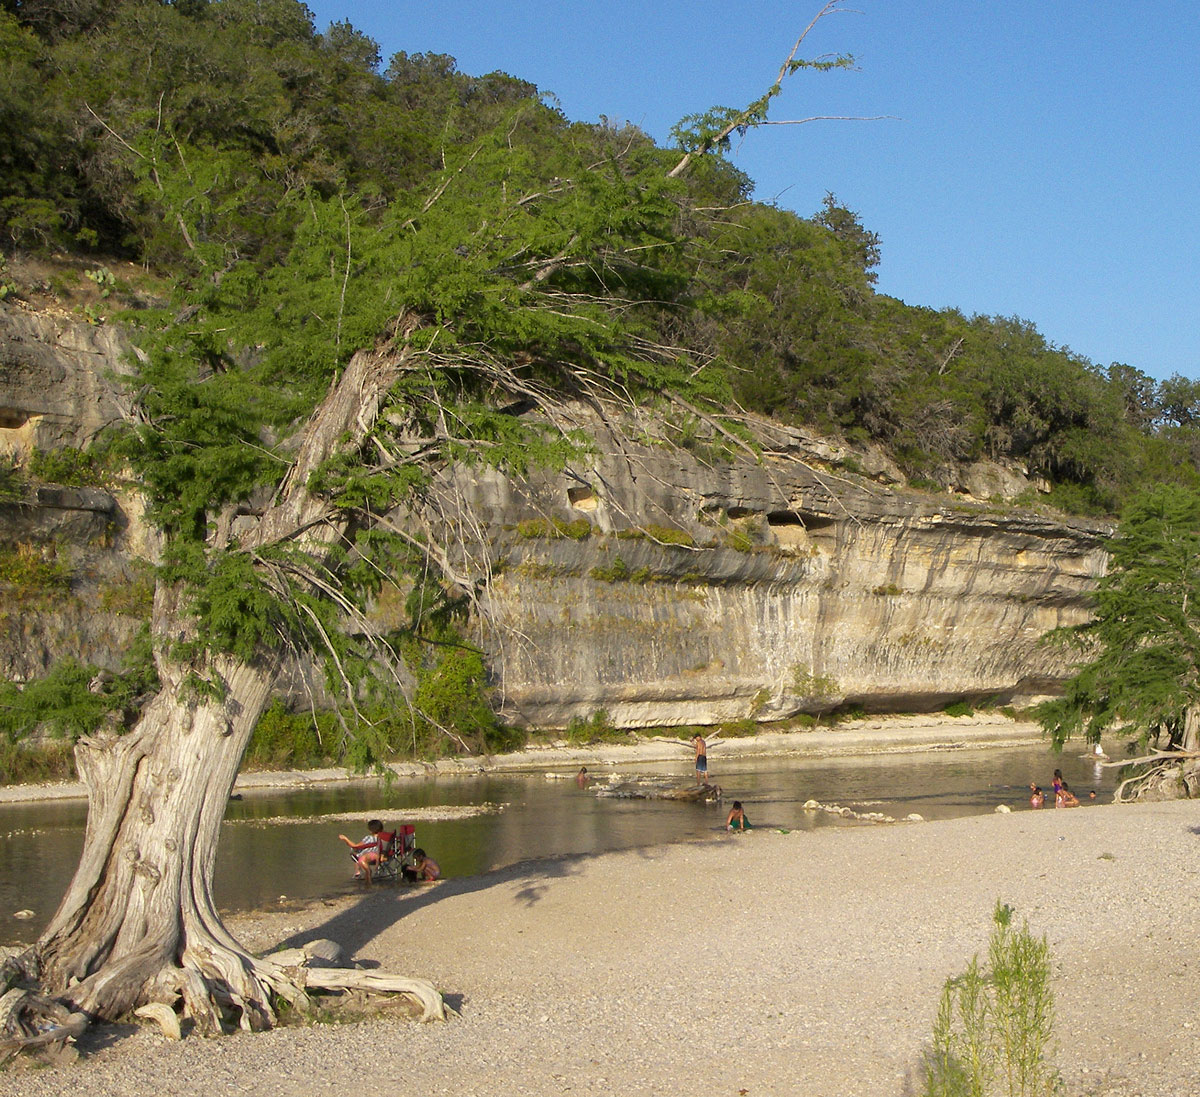 A bluff on the Guadalupe River in Guadalupe River State Park